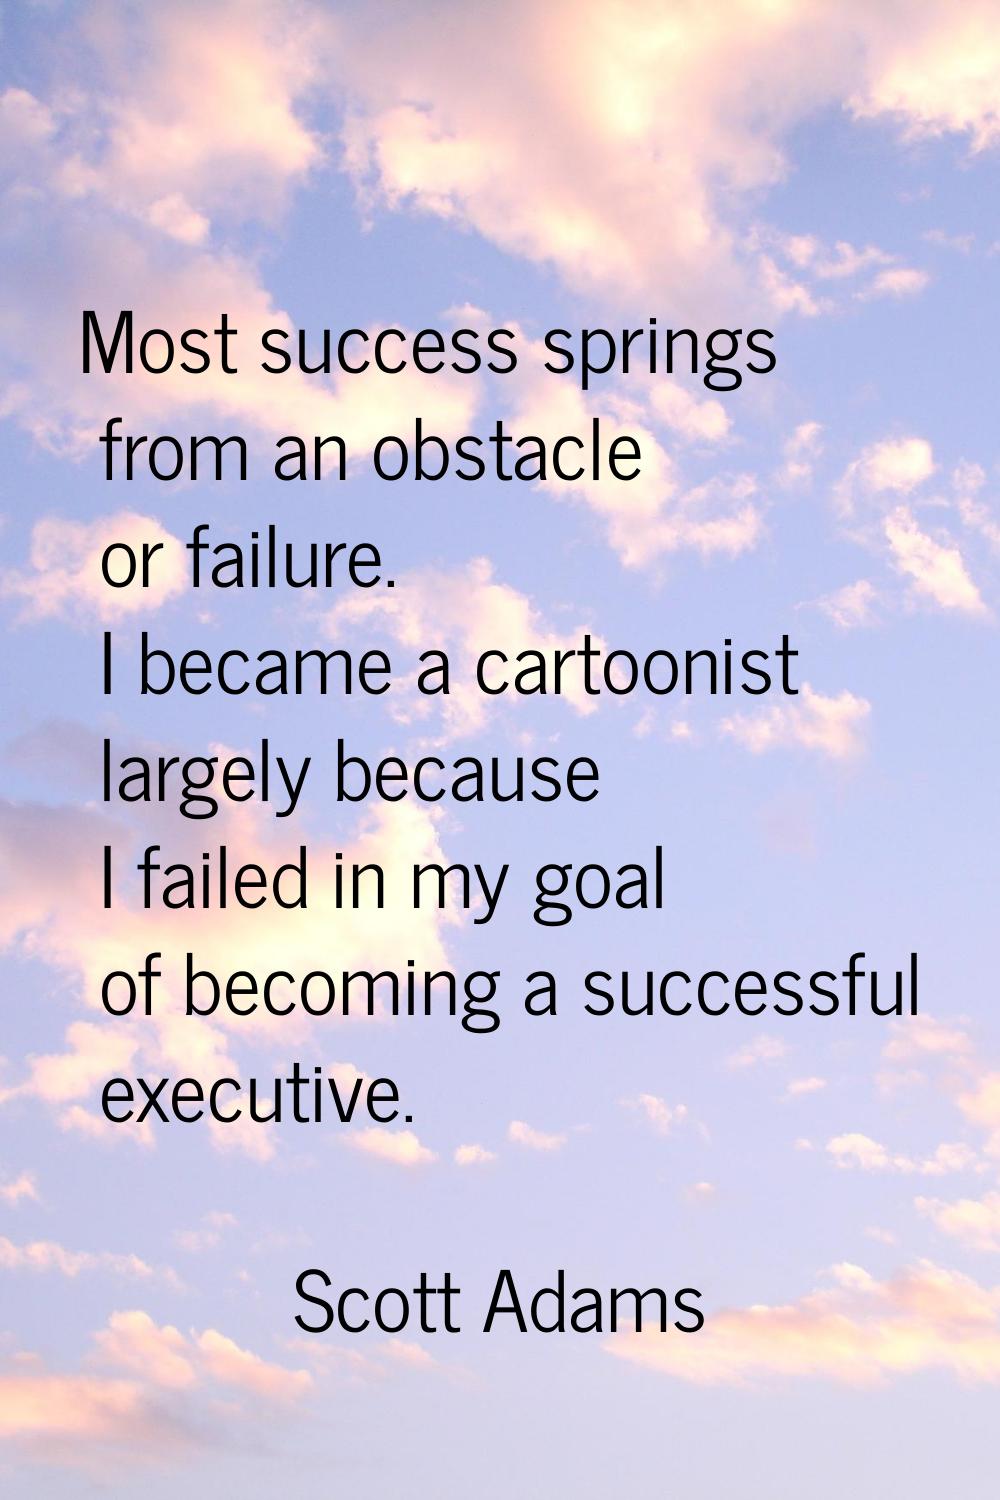 Most success springs from an obstacle or failure. I became a cartoonist largely because I failed in